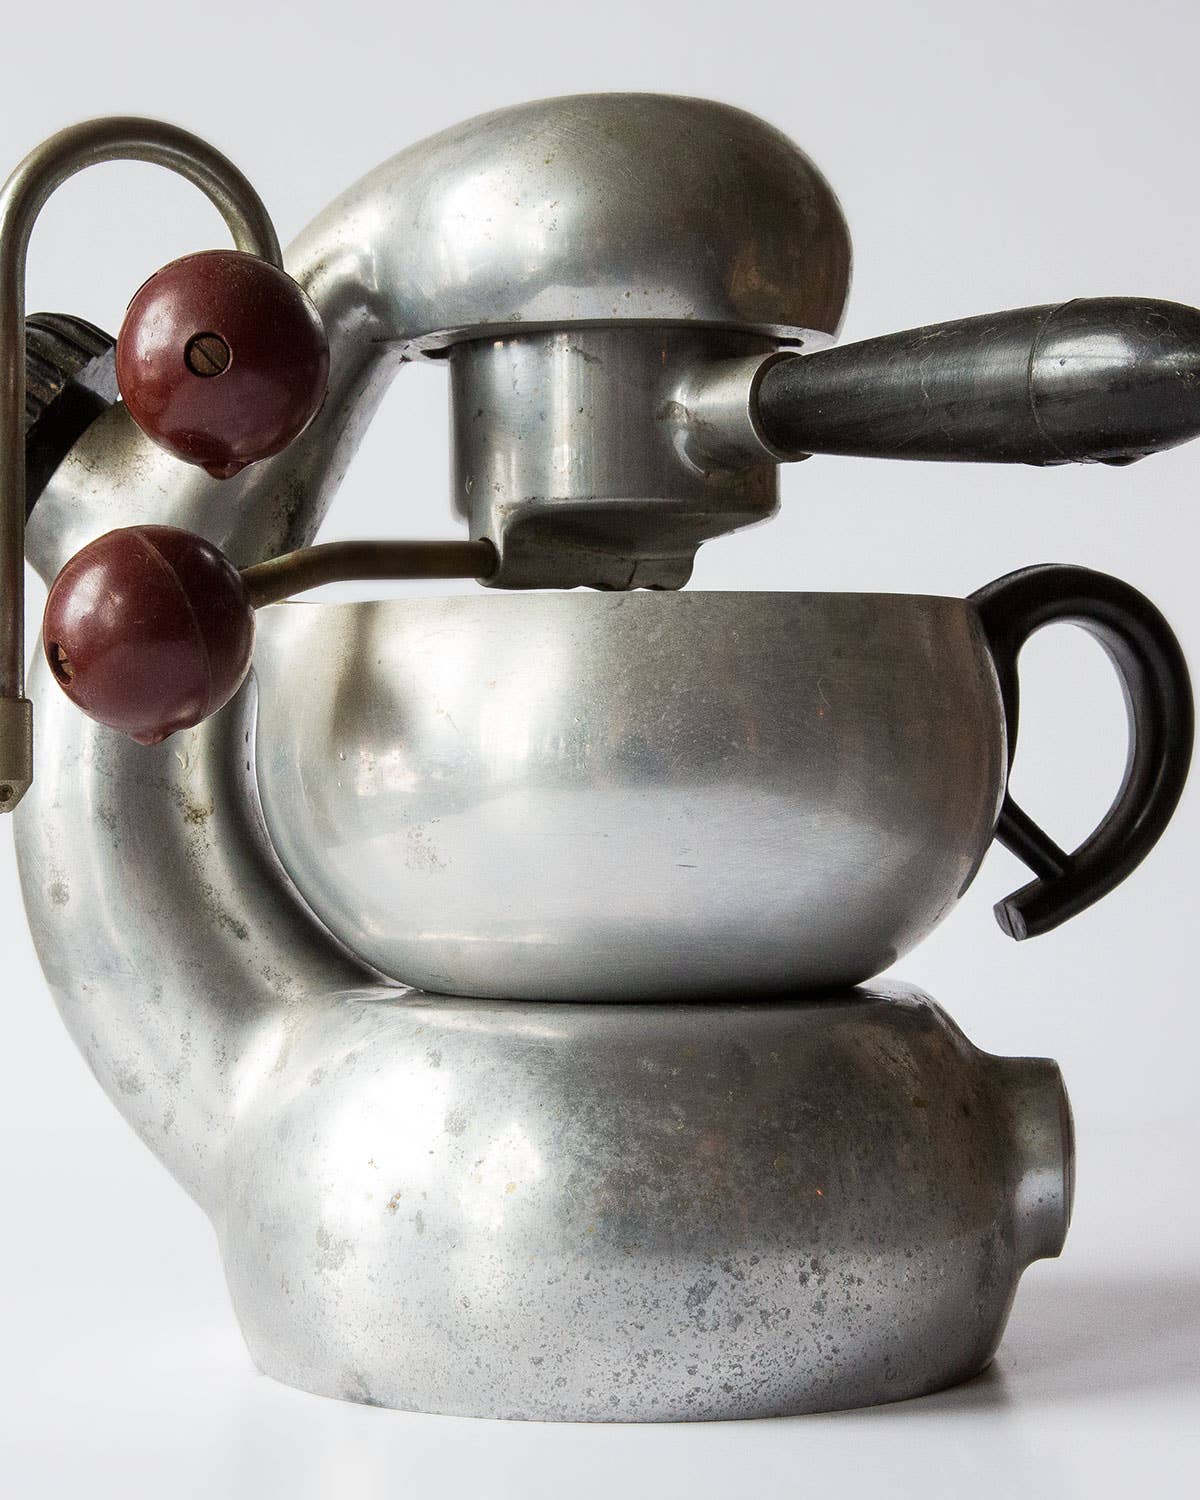 Collections: John McCormick’s Vintage Espresso Makers